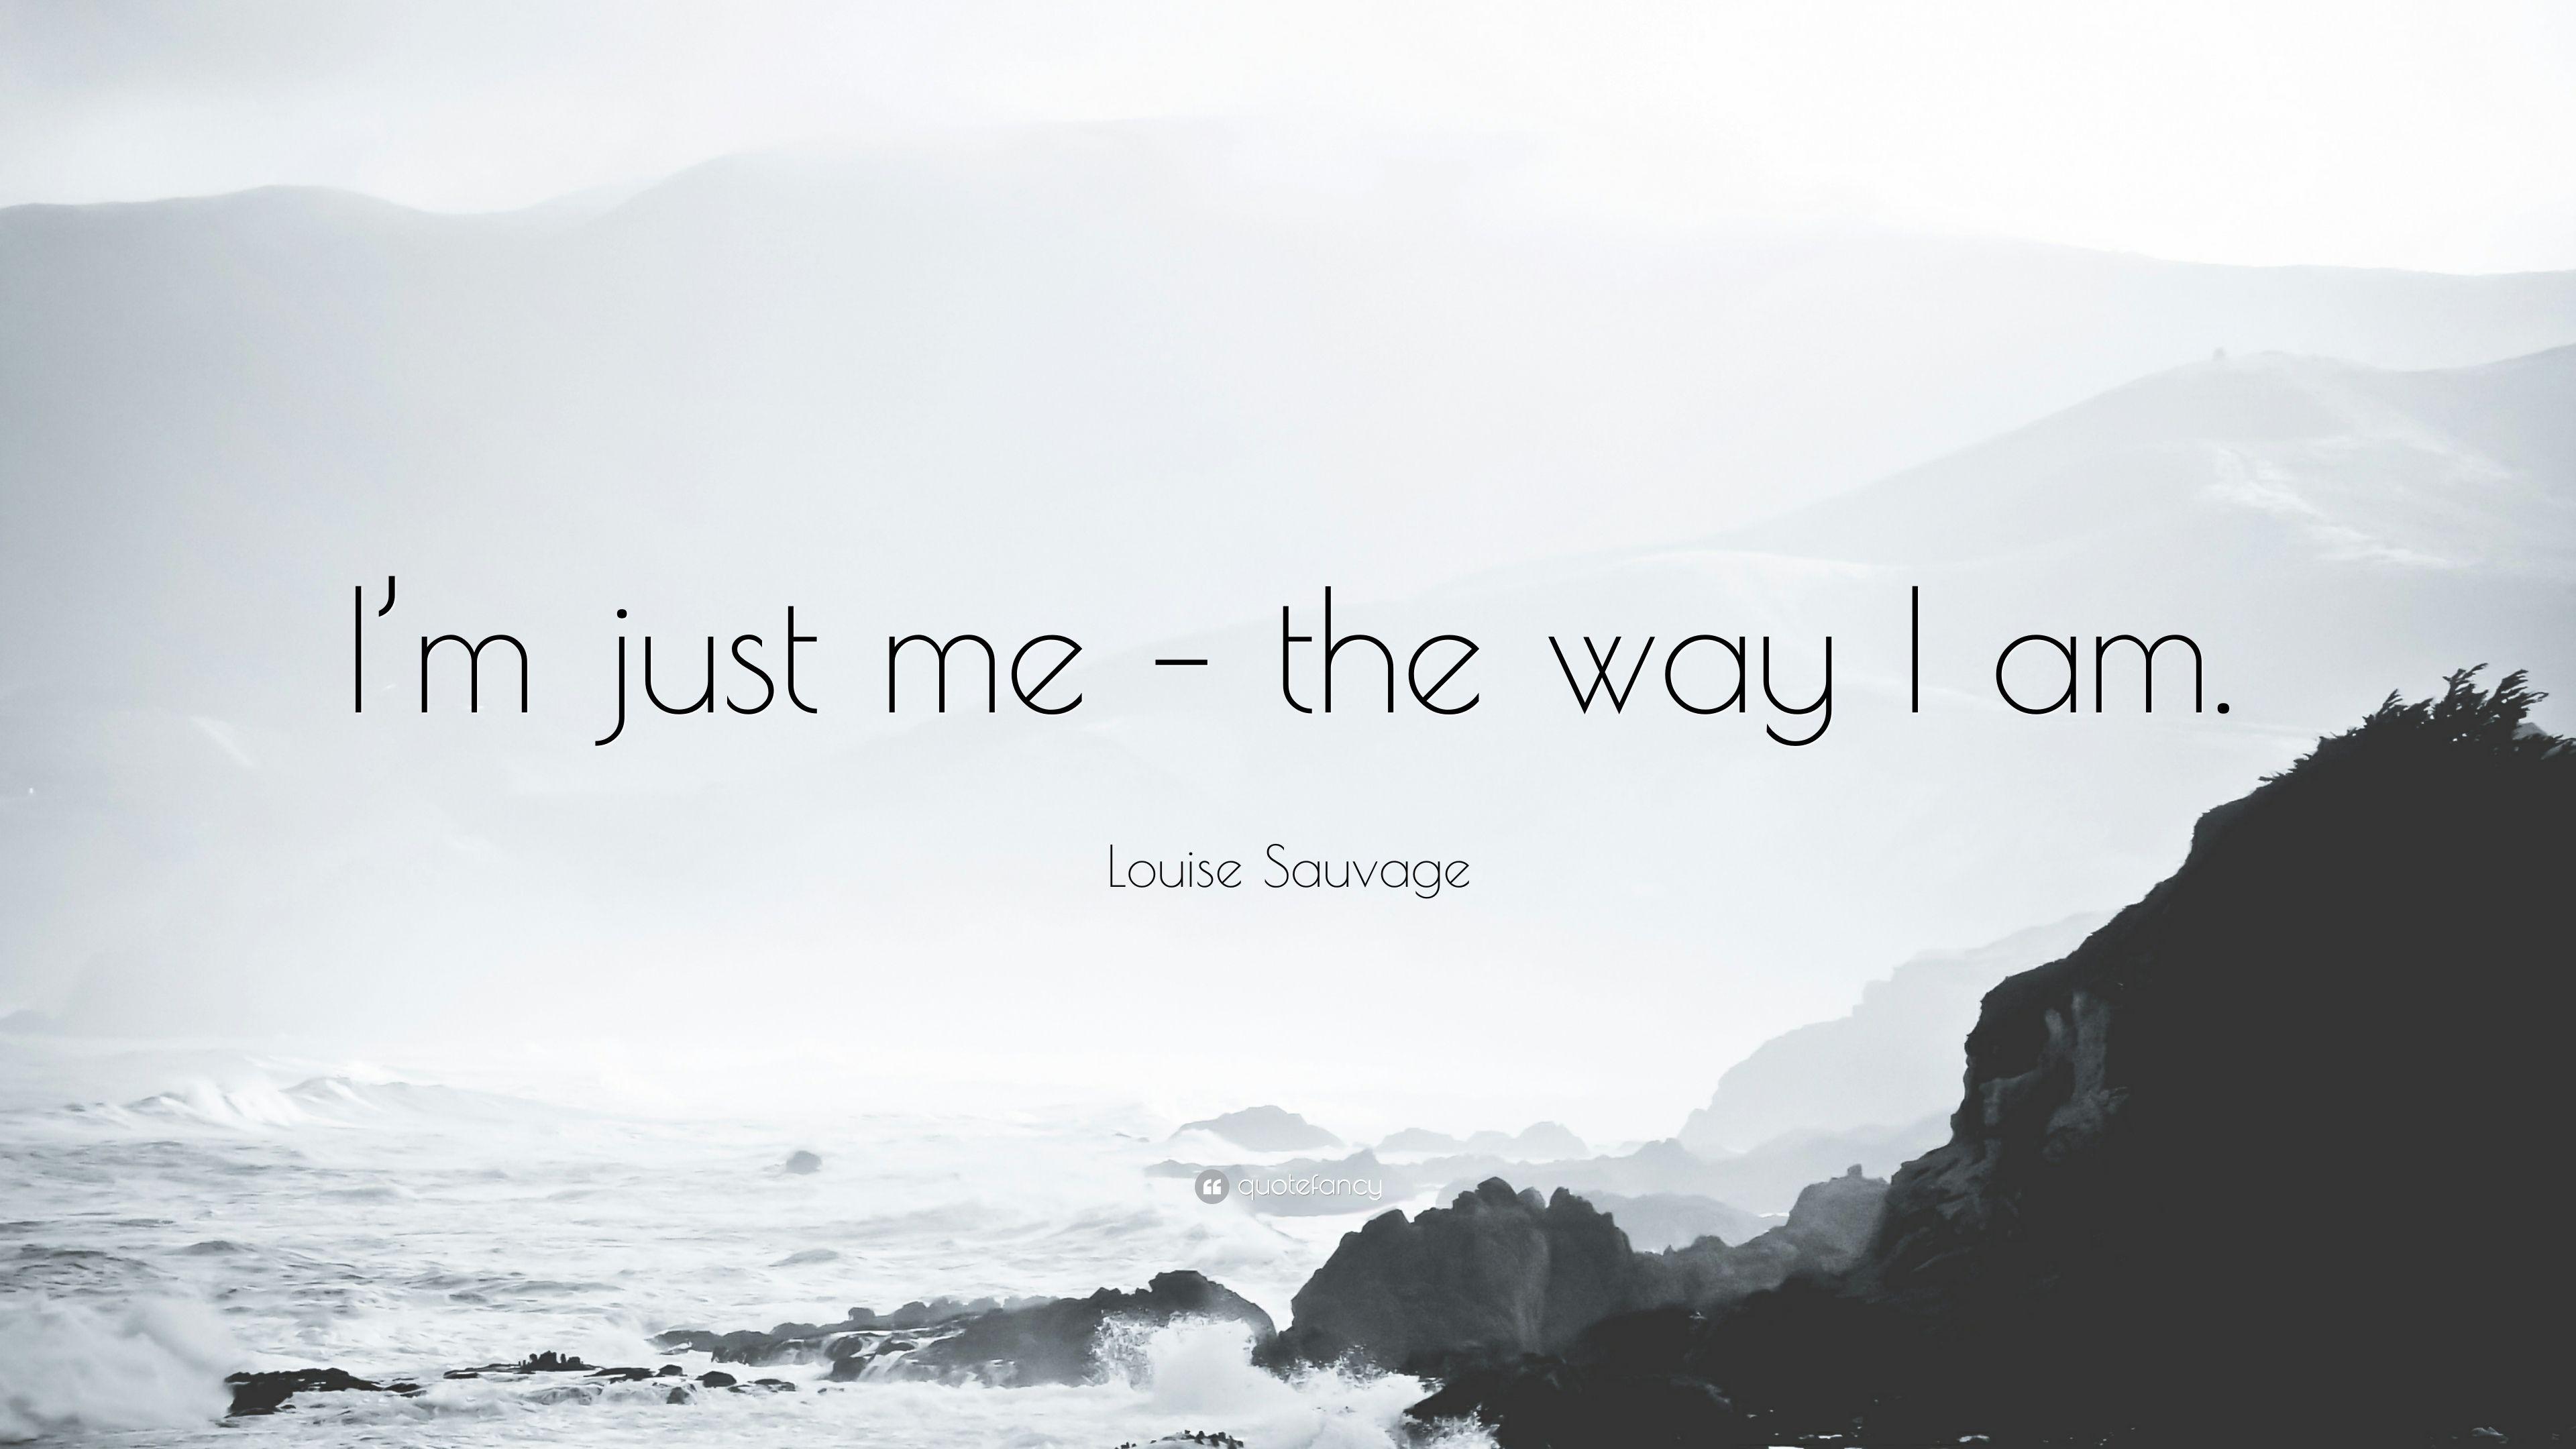 Louise Sauvage Quote: “I'm just me